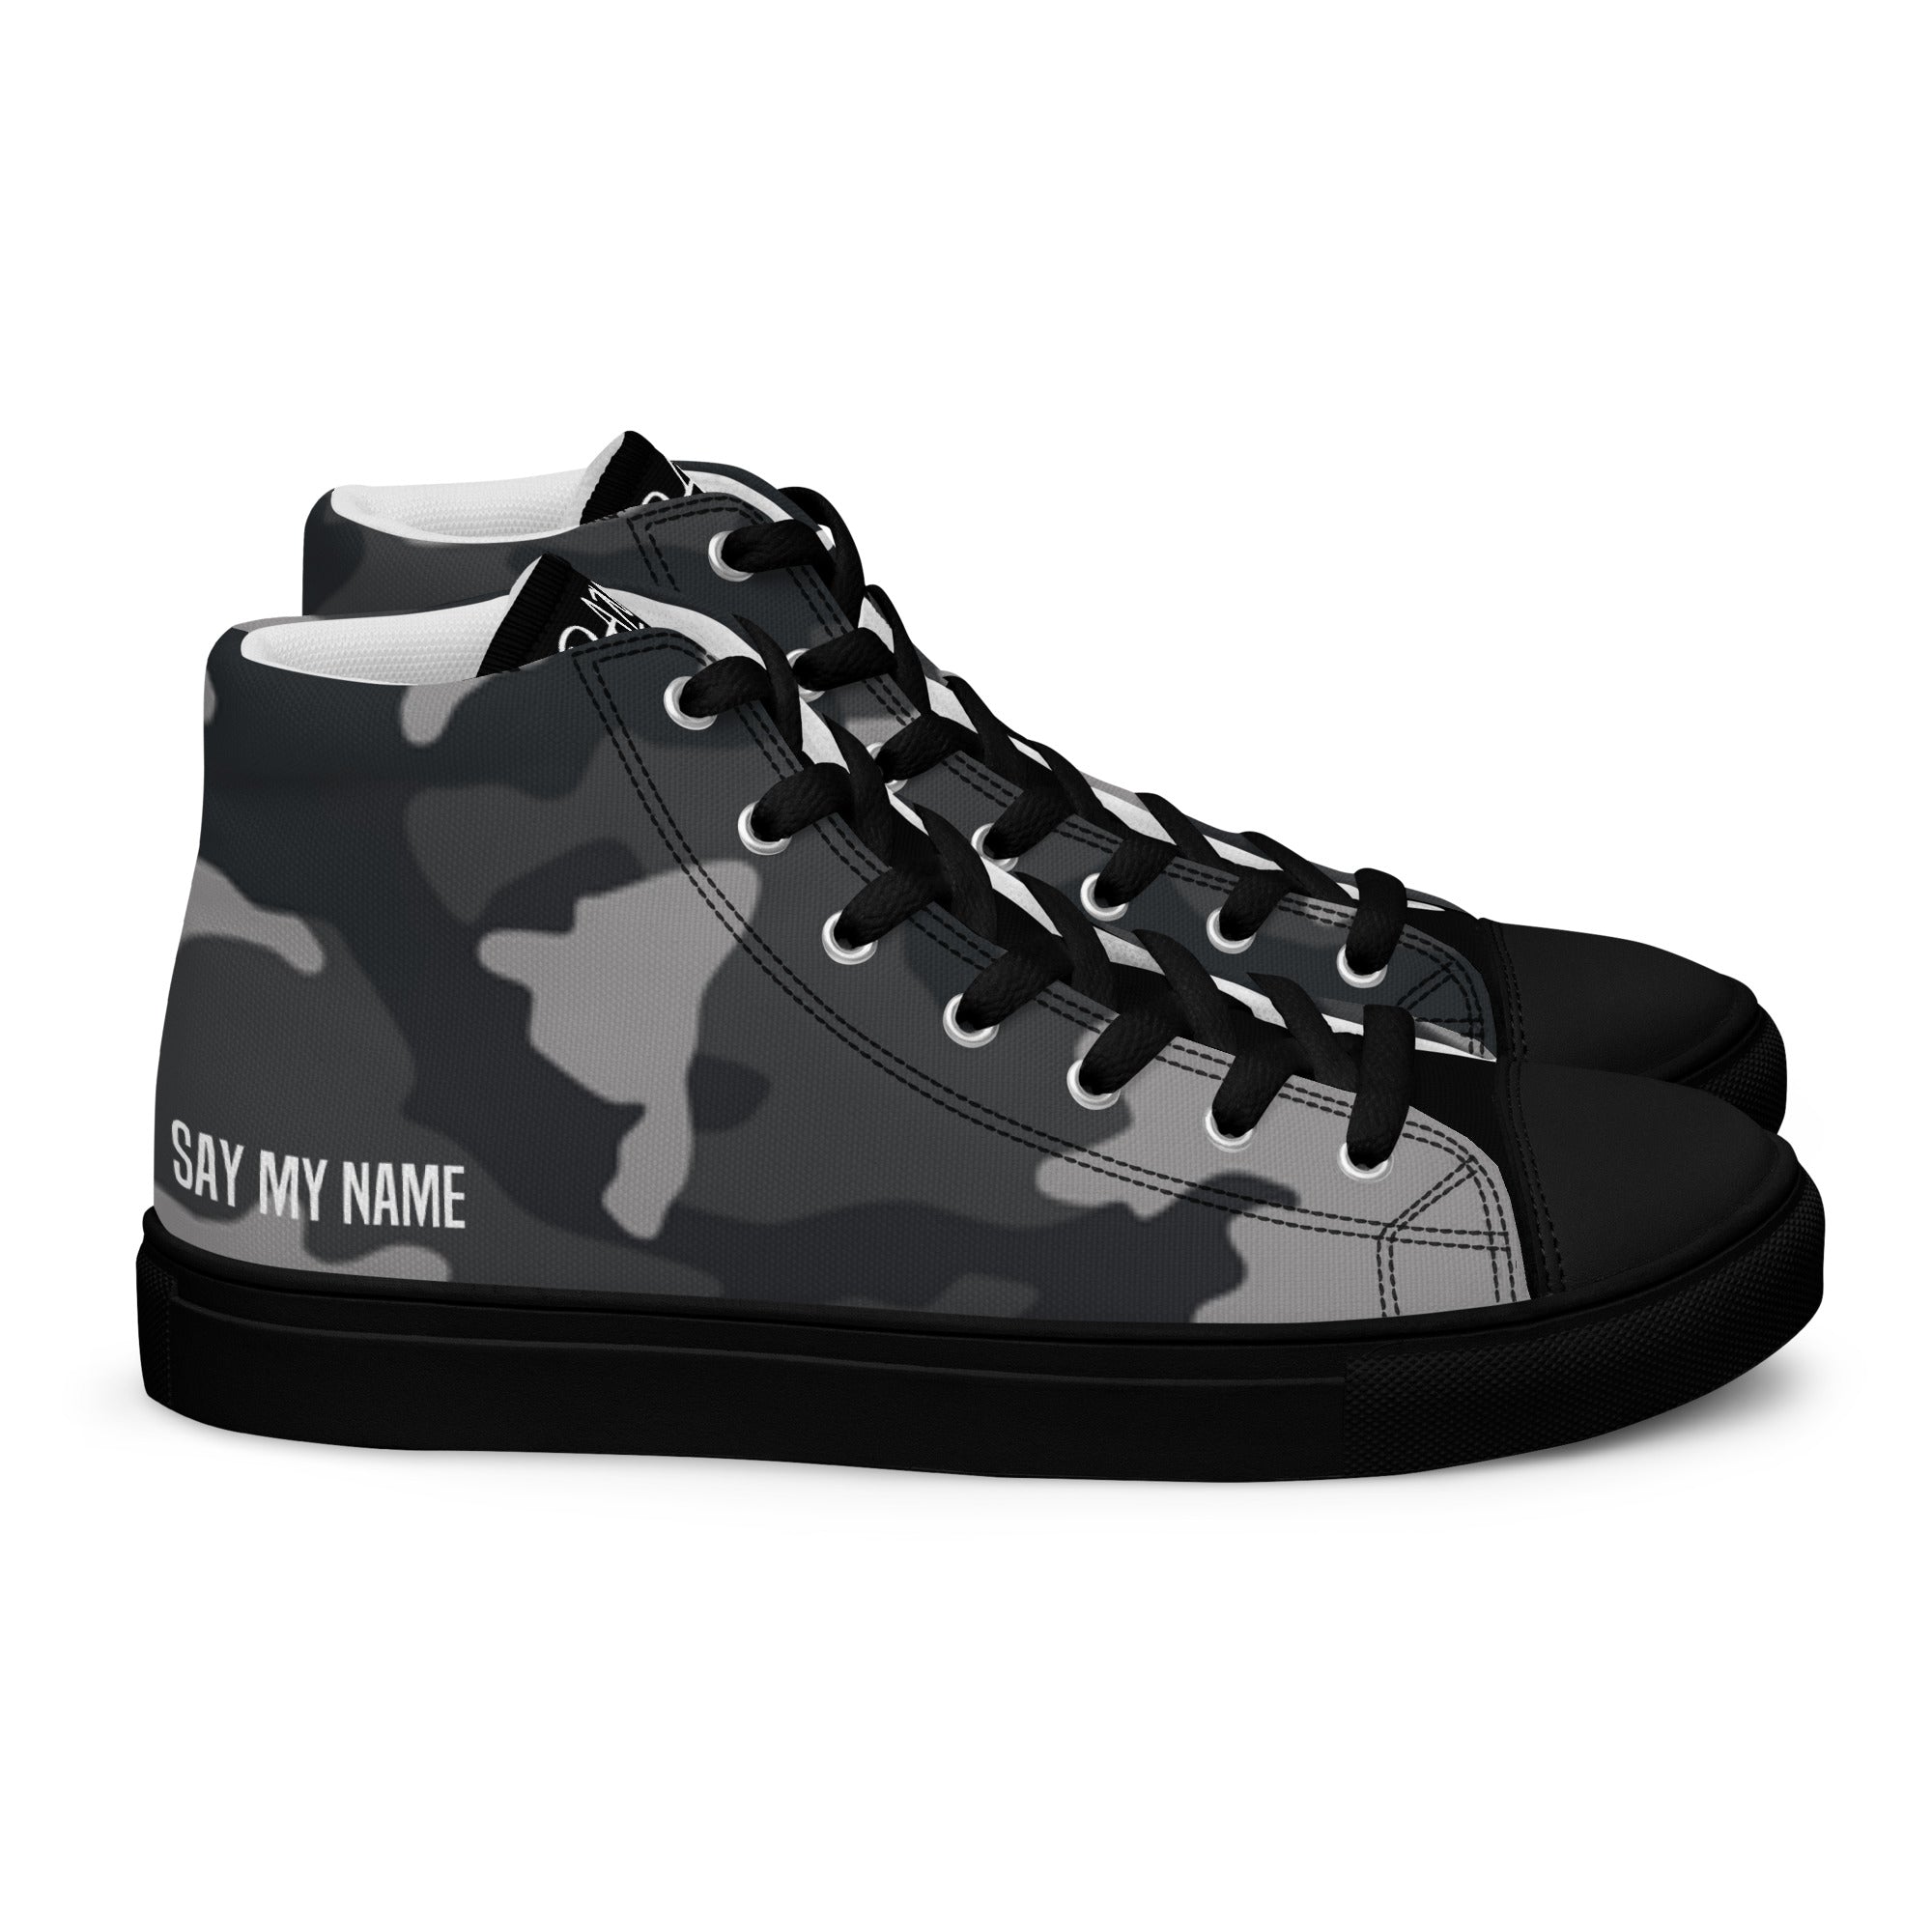 Men's high-top gray camouflage canvas sneakers "SAY MY NAME"